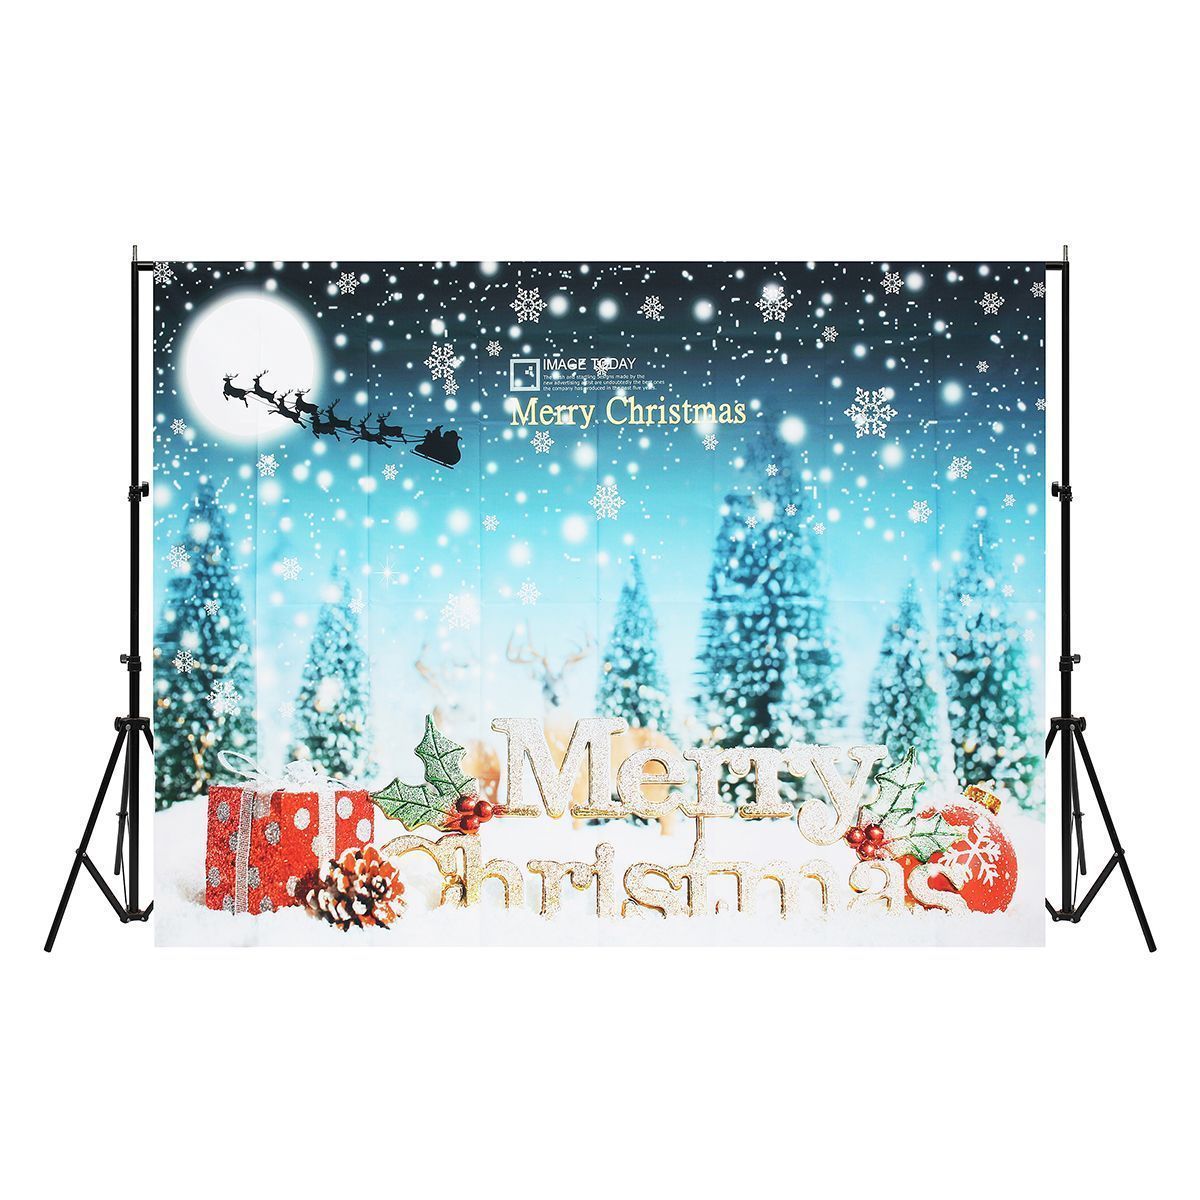 5x7FT-Merry-Christmas-Snow-Gift-Photography-Backdrop-Background-Studio-Prop-1208714